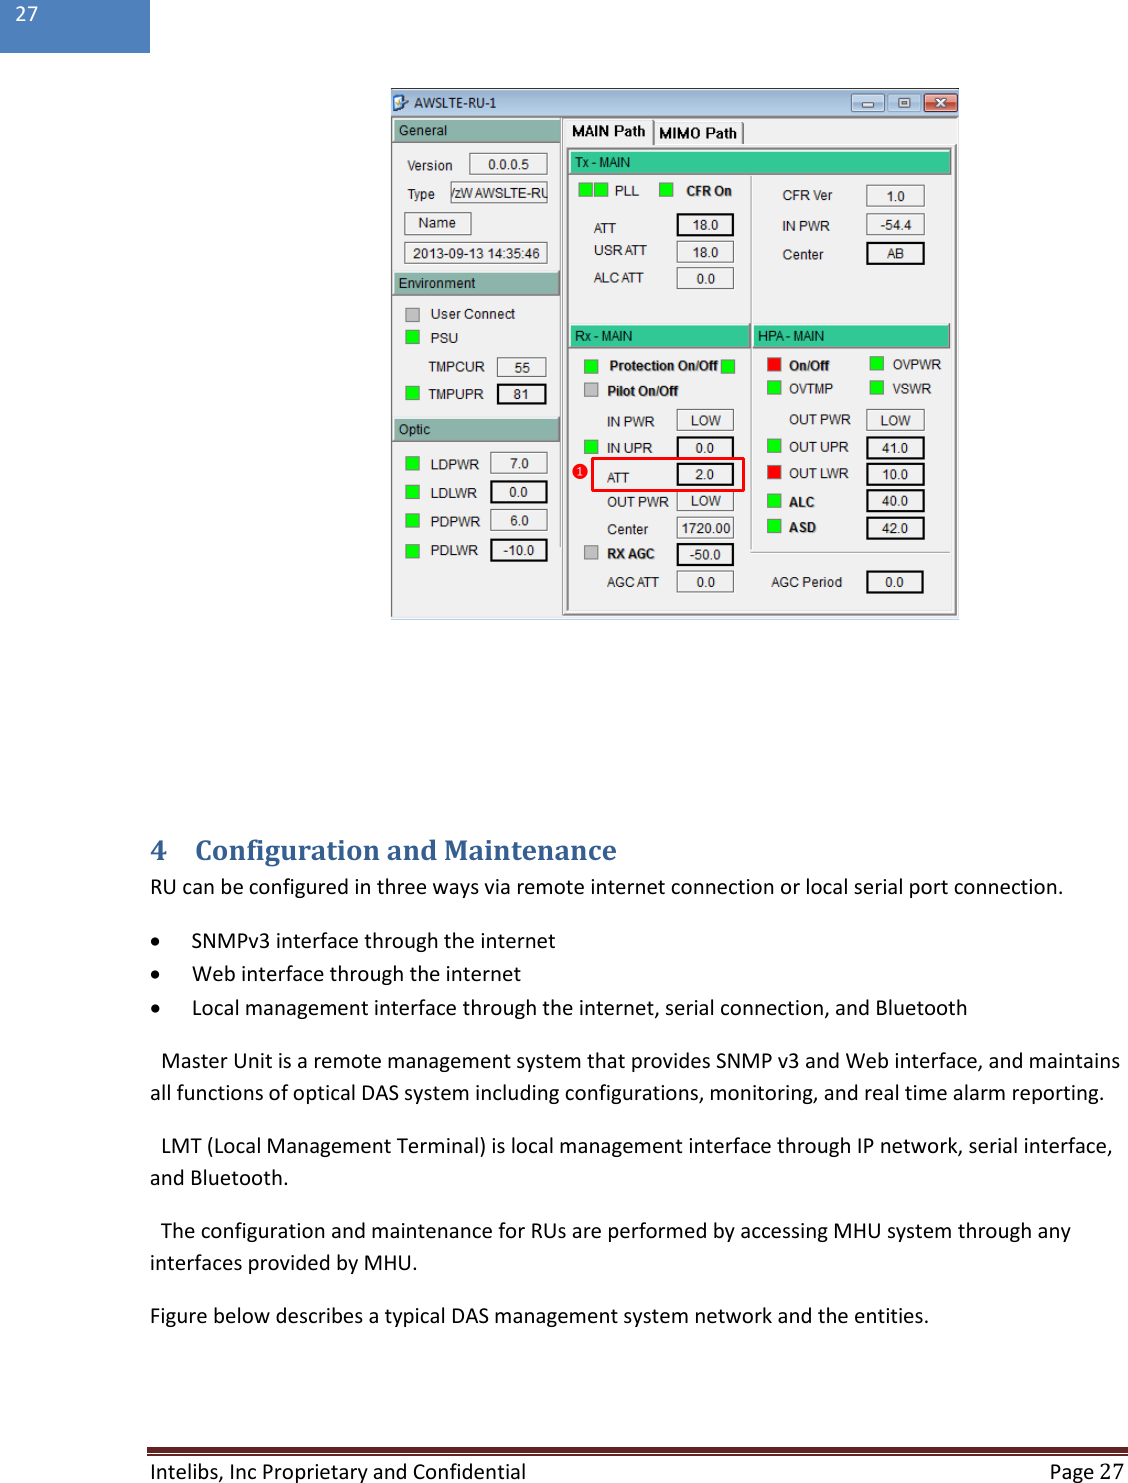  Intelibs, Inc Proprietary and Confidential  Page 27  27      4 Configuration and Maintenance RU can be configured in three ways via remote internet connection or local serial port connection. • SNMPv3 interface through the internet • Web interface through the internet • Local management interface through the internet, serial connection, and Bluetooth Master Unit is a remote management system that provides SNMP v3 and Web interface, and maintains all functions of optical DAS system including configurations, monitoring, and real time alarm reporting. LMT (Local Management Terminal) is local management interface through IP network, serial interface, and Bluetooth.  The configuration and maintenance for RUs are performed by accessing MHU system through any interfaces provided by MHU. Figure below describes a typical DAS management system network and the entities.    ❶